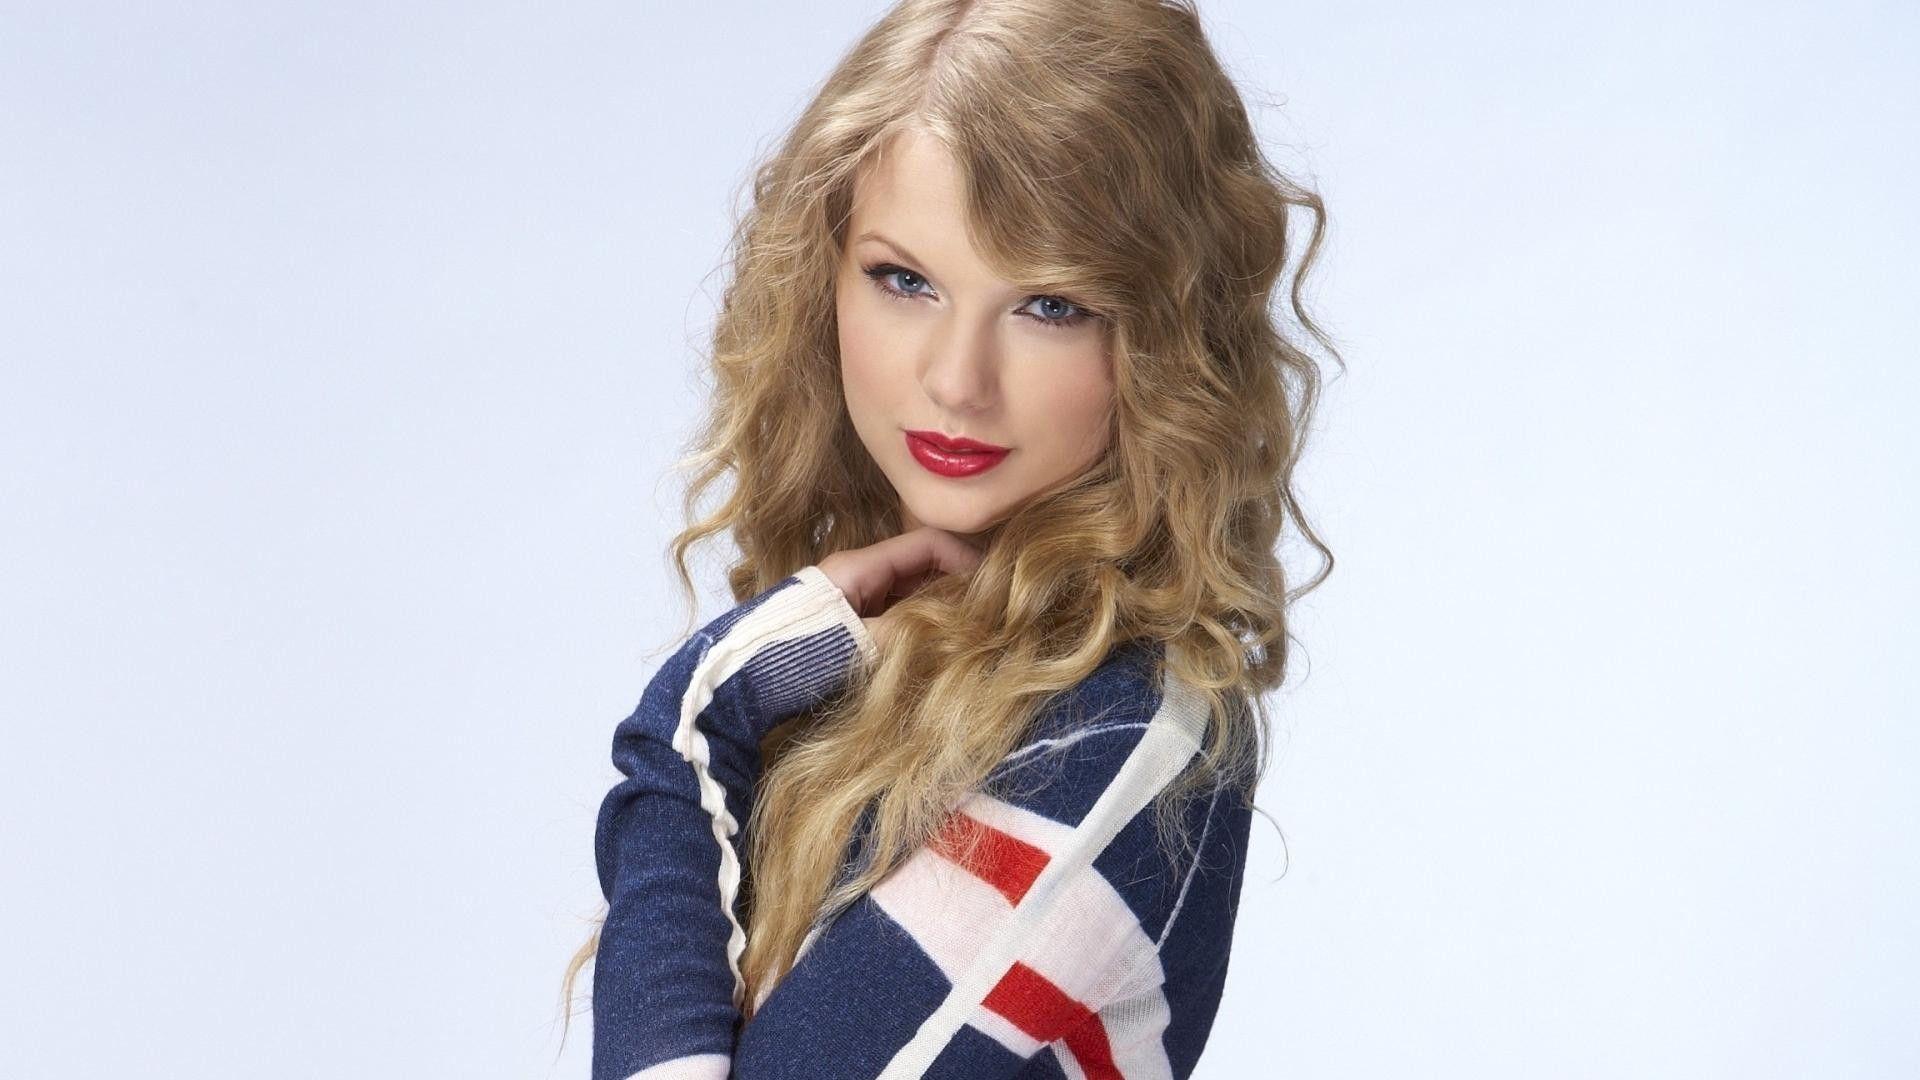 Taylor Swift Windows 8 Themes and Background 2013. Download free